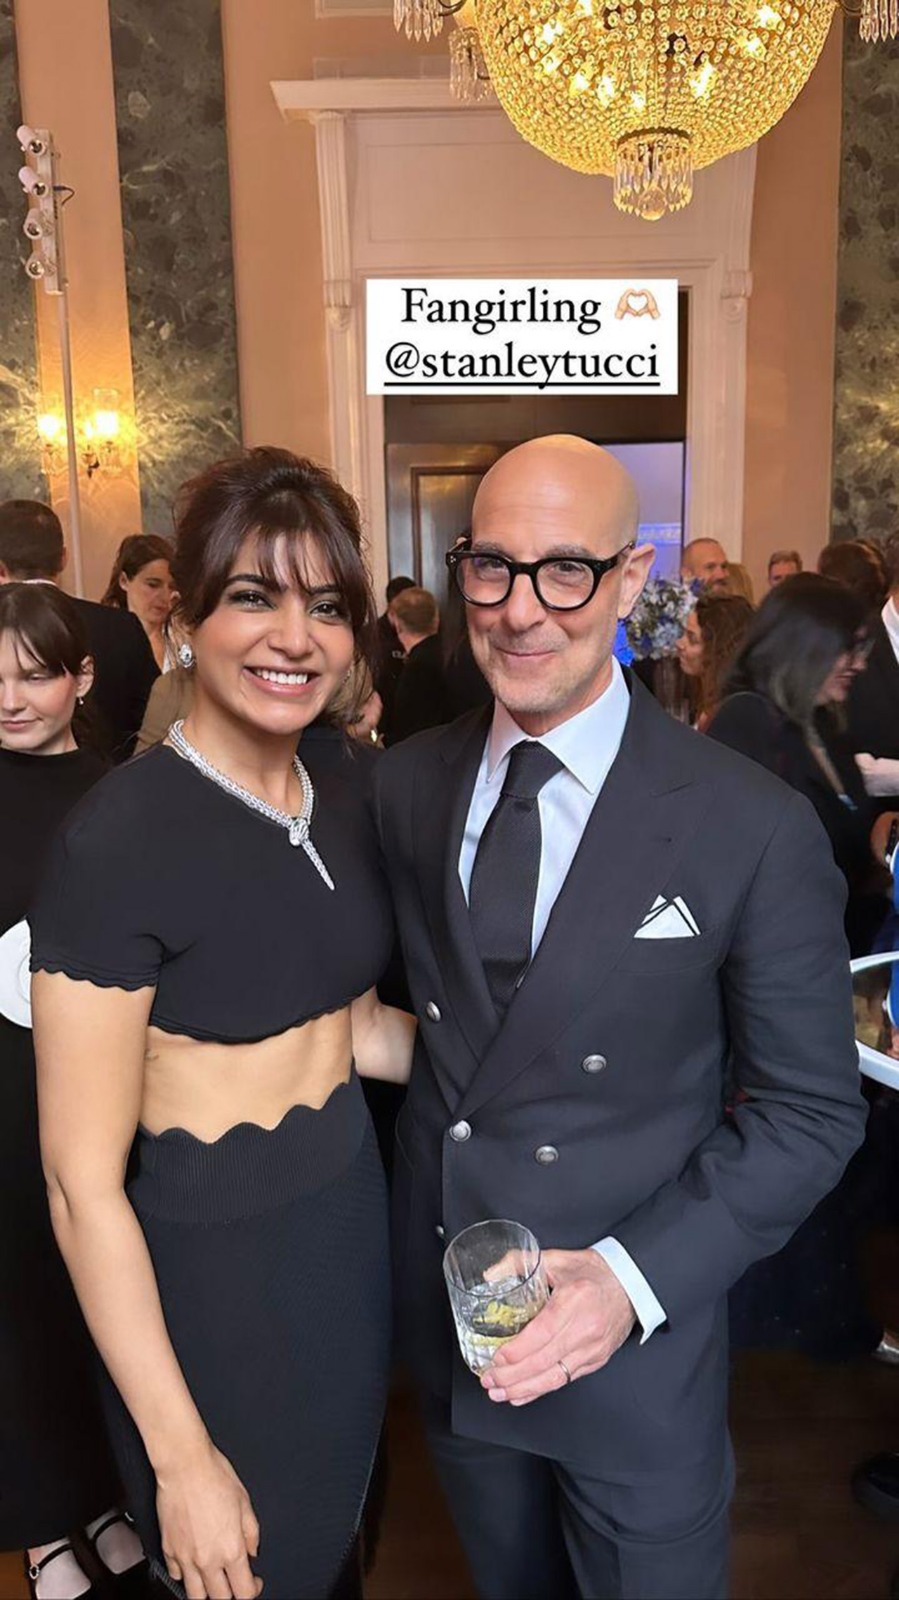 Samantha Ruth Prabhu cannot stop ‘fangirling’ over meeting American star Stanley Tucci at Citadel premiere